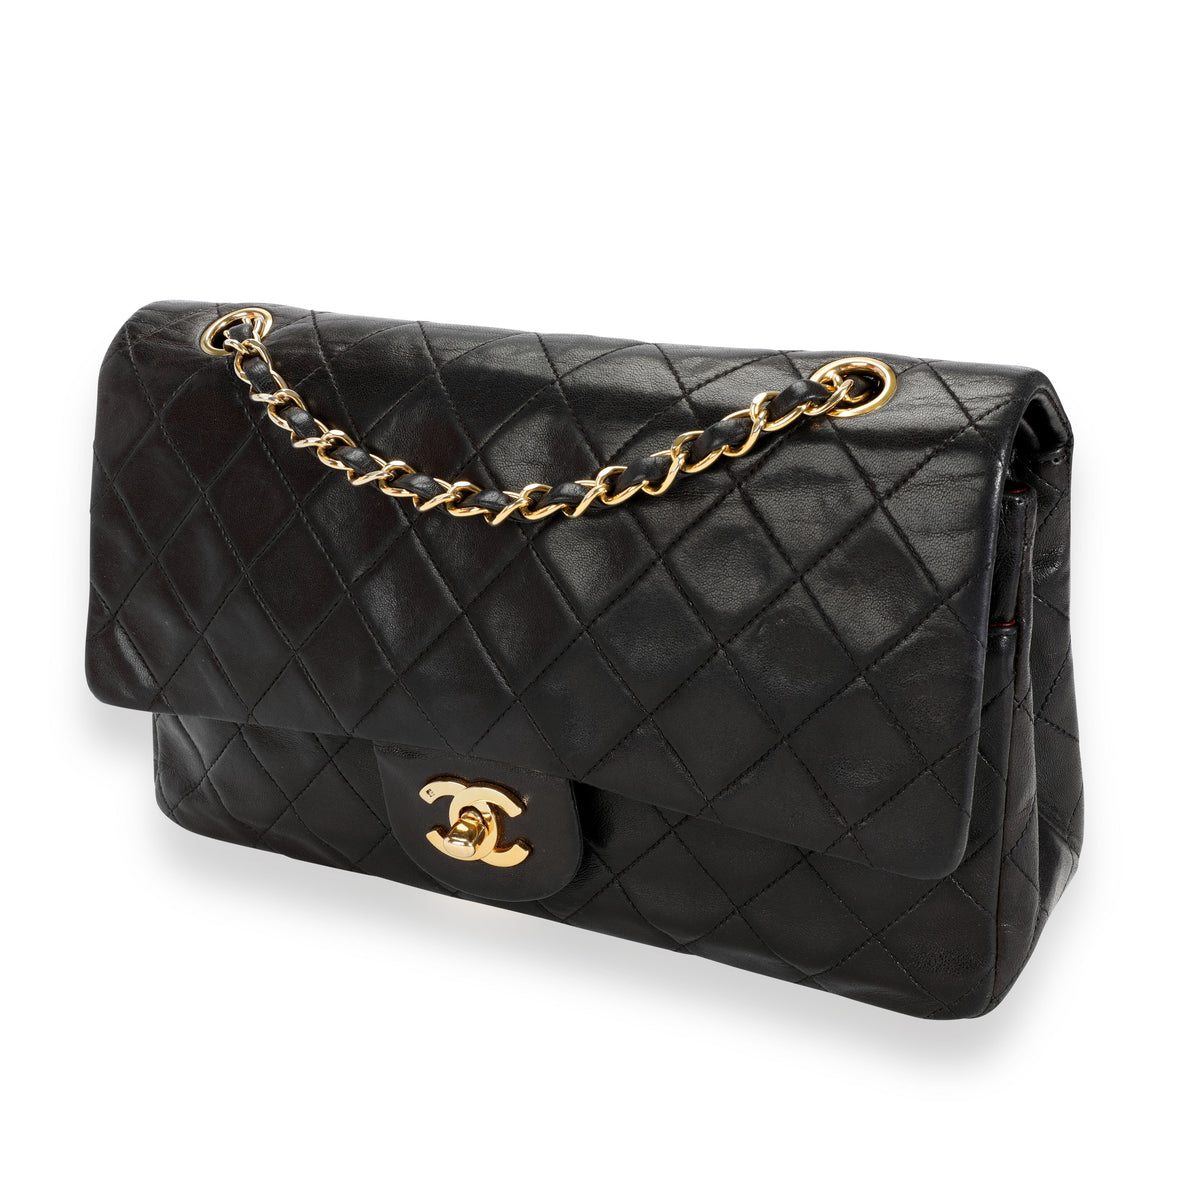 Chanel Vintage Black Quilted Lambskin Leather Medium Classic Double Flap Bag Gold Hardware, 1991-1994 (Very Good)